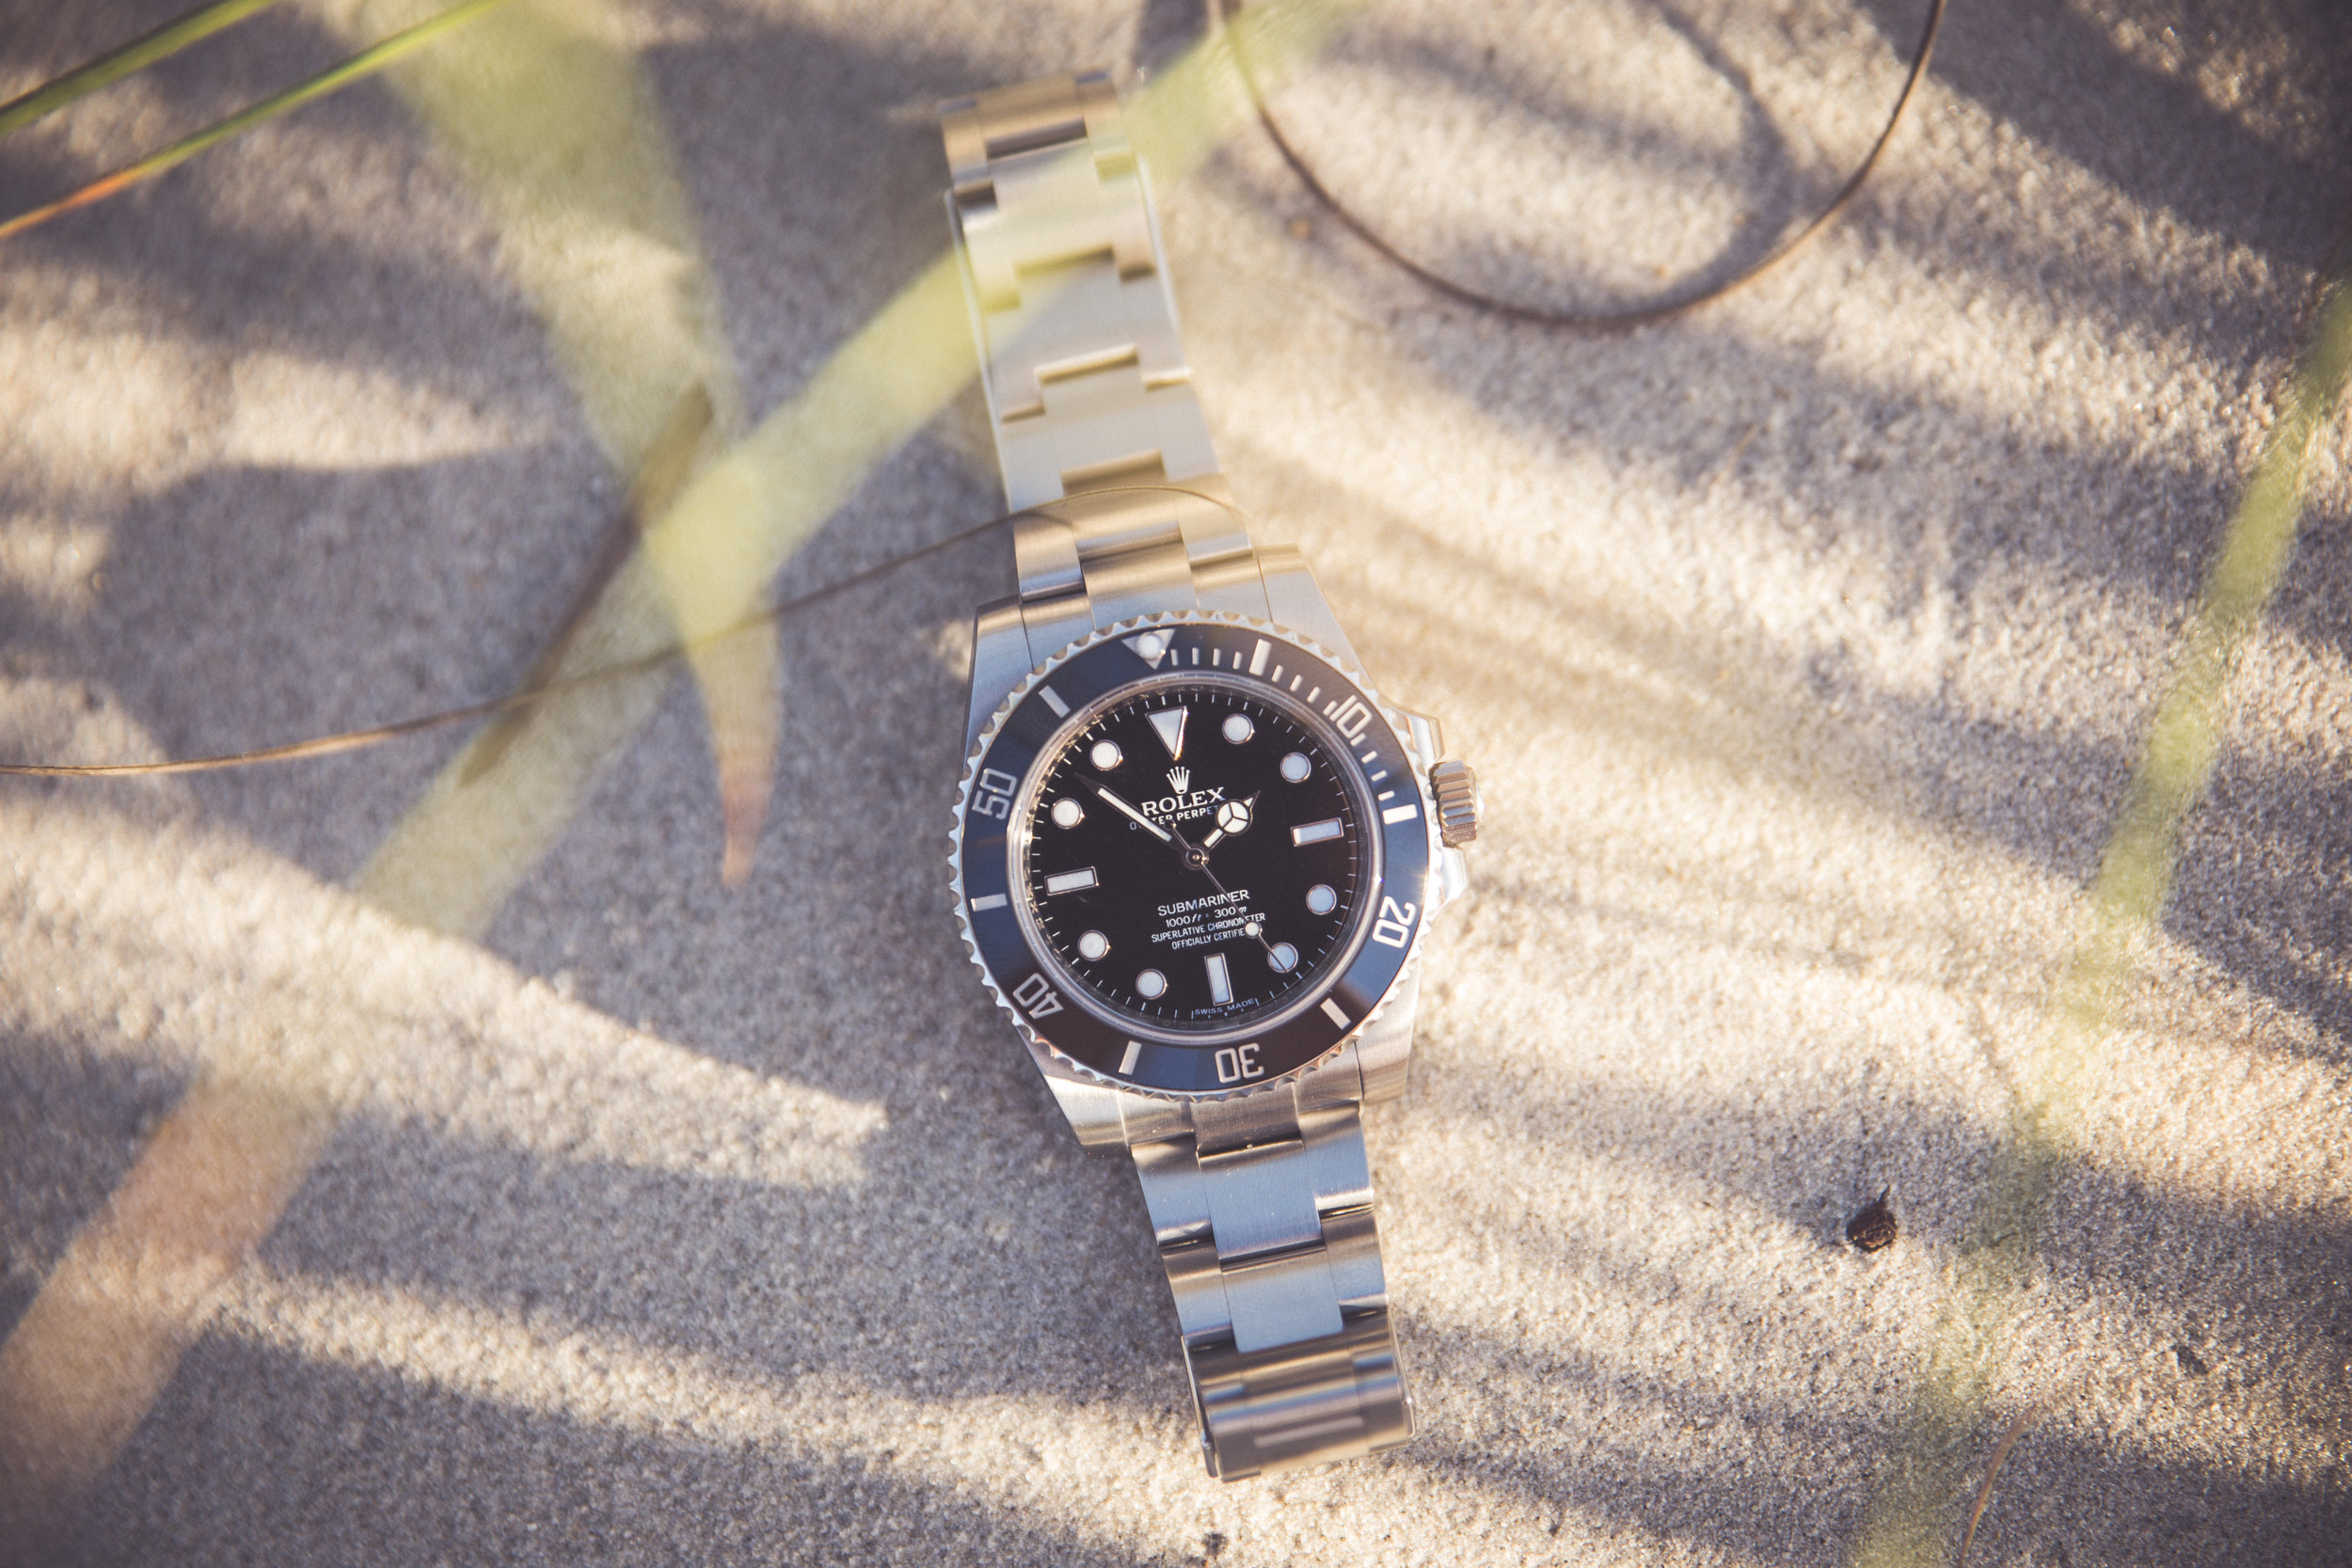 Rolex Submariner : All about this Iconic Timepiece - Luxury Watches Blog